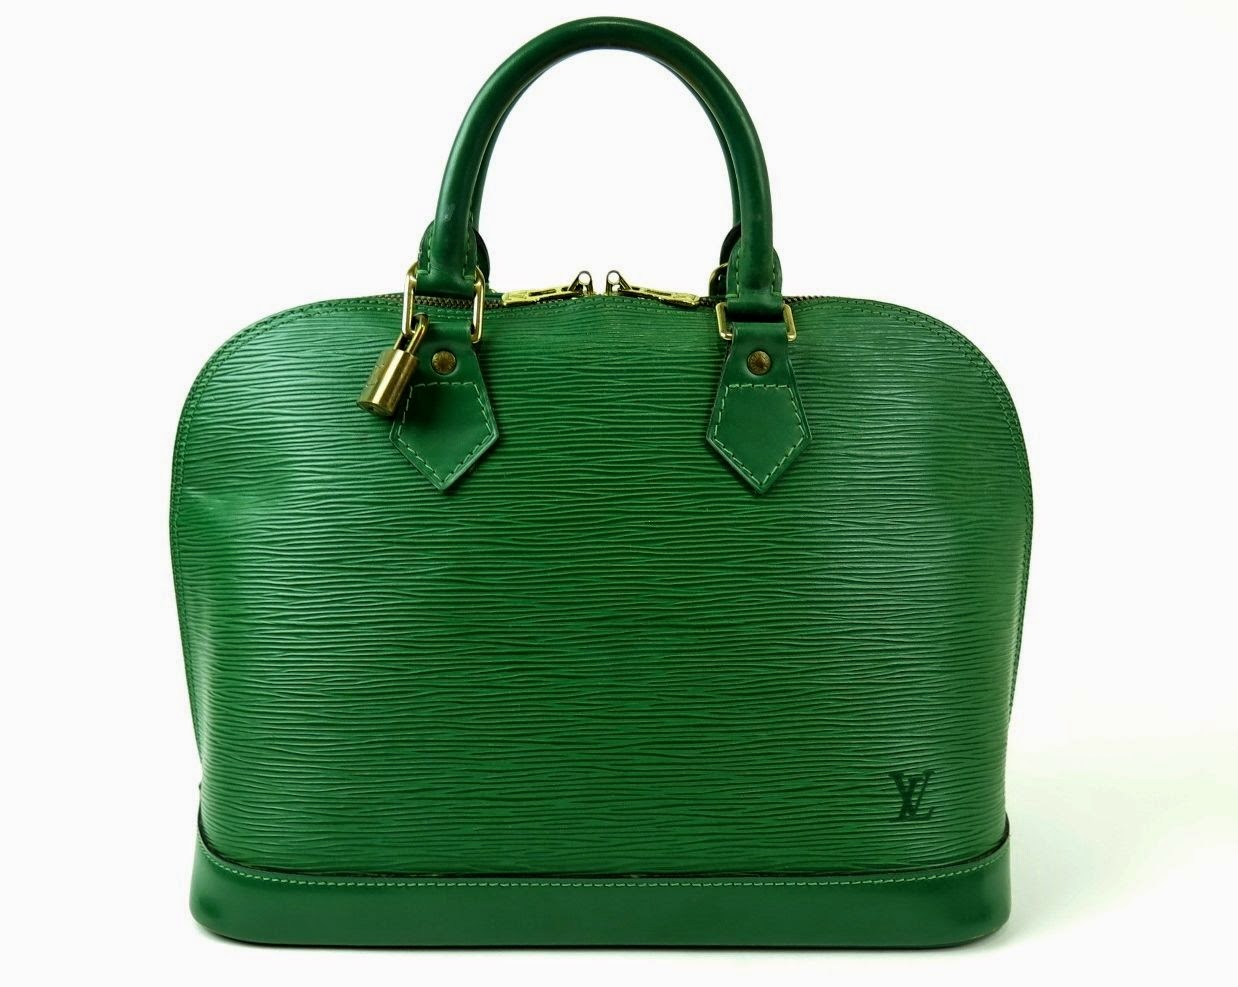 Passion 4 Designer Bags: Louis Vuitton - (Pre-Loved) Alma Green EPI Leather Hand bag